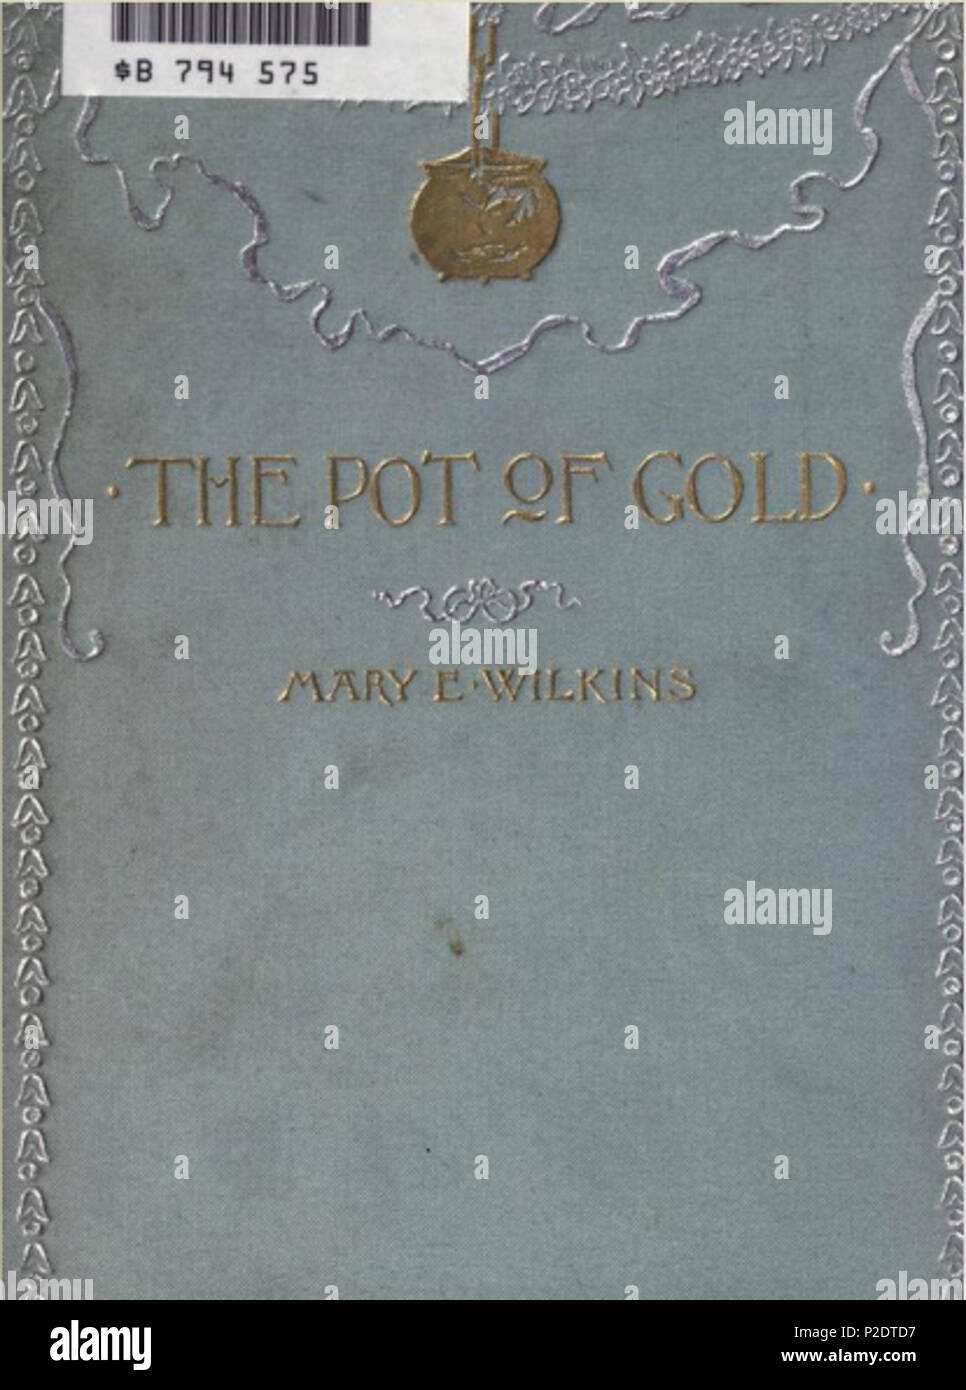 62 The Pot of Gold and Other Stories BINDING Mary E. Wilkins Freeman (1892) Stock Photo